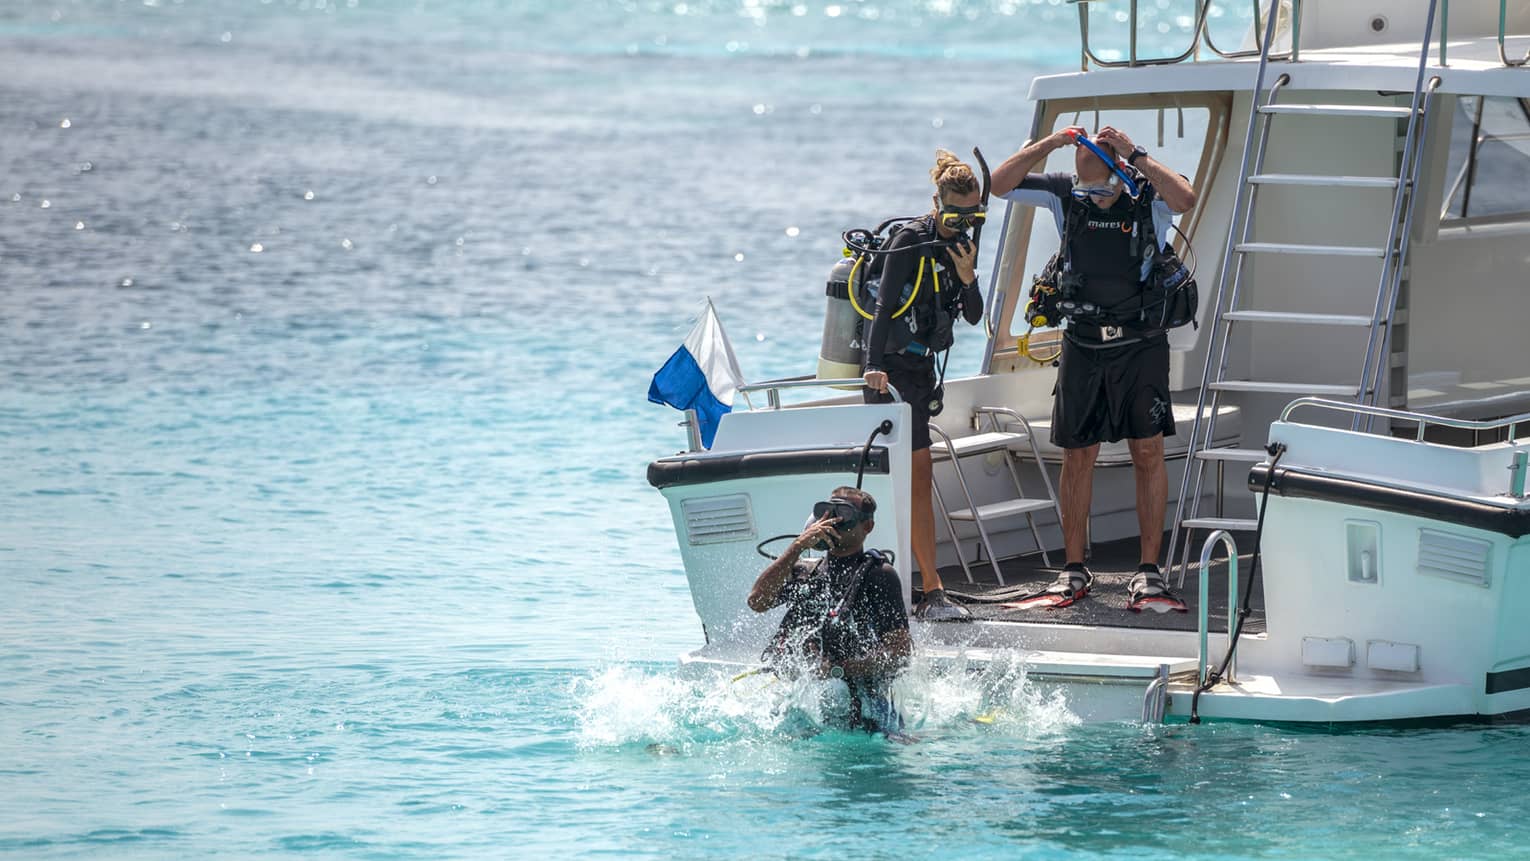 One scuba diver in water, two other divers stand on boat preparing to jump